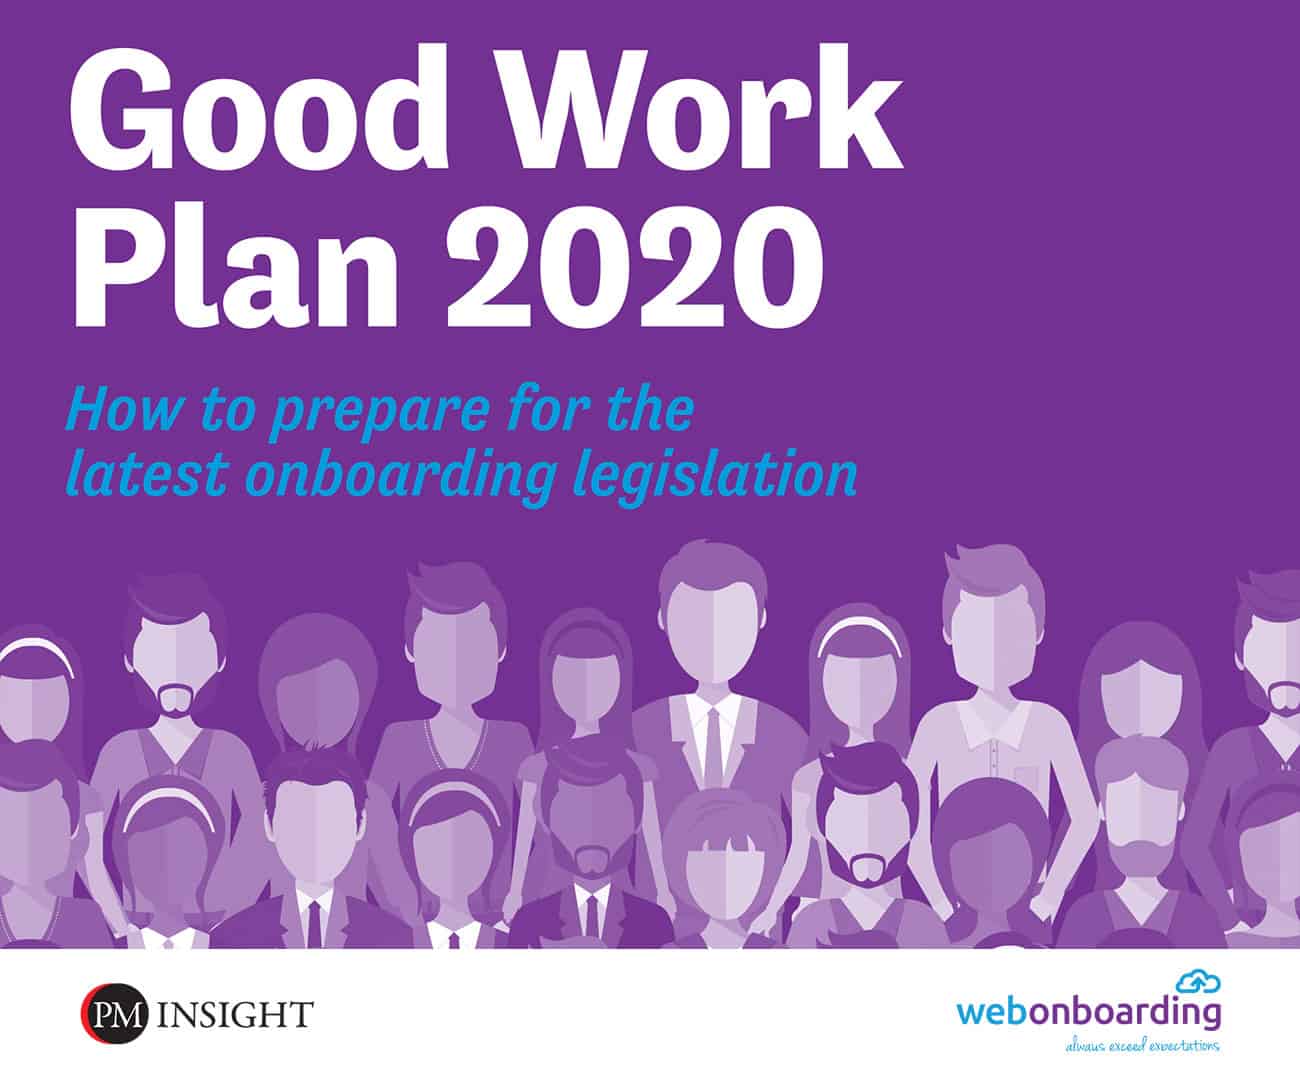 what is the good work plan?